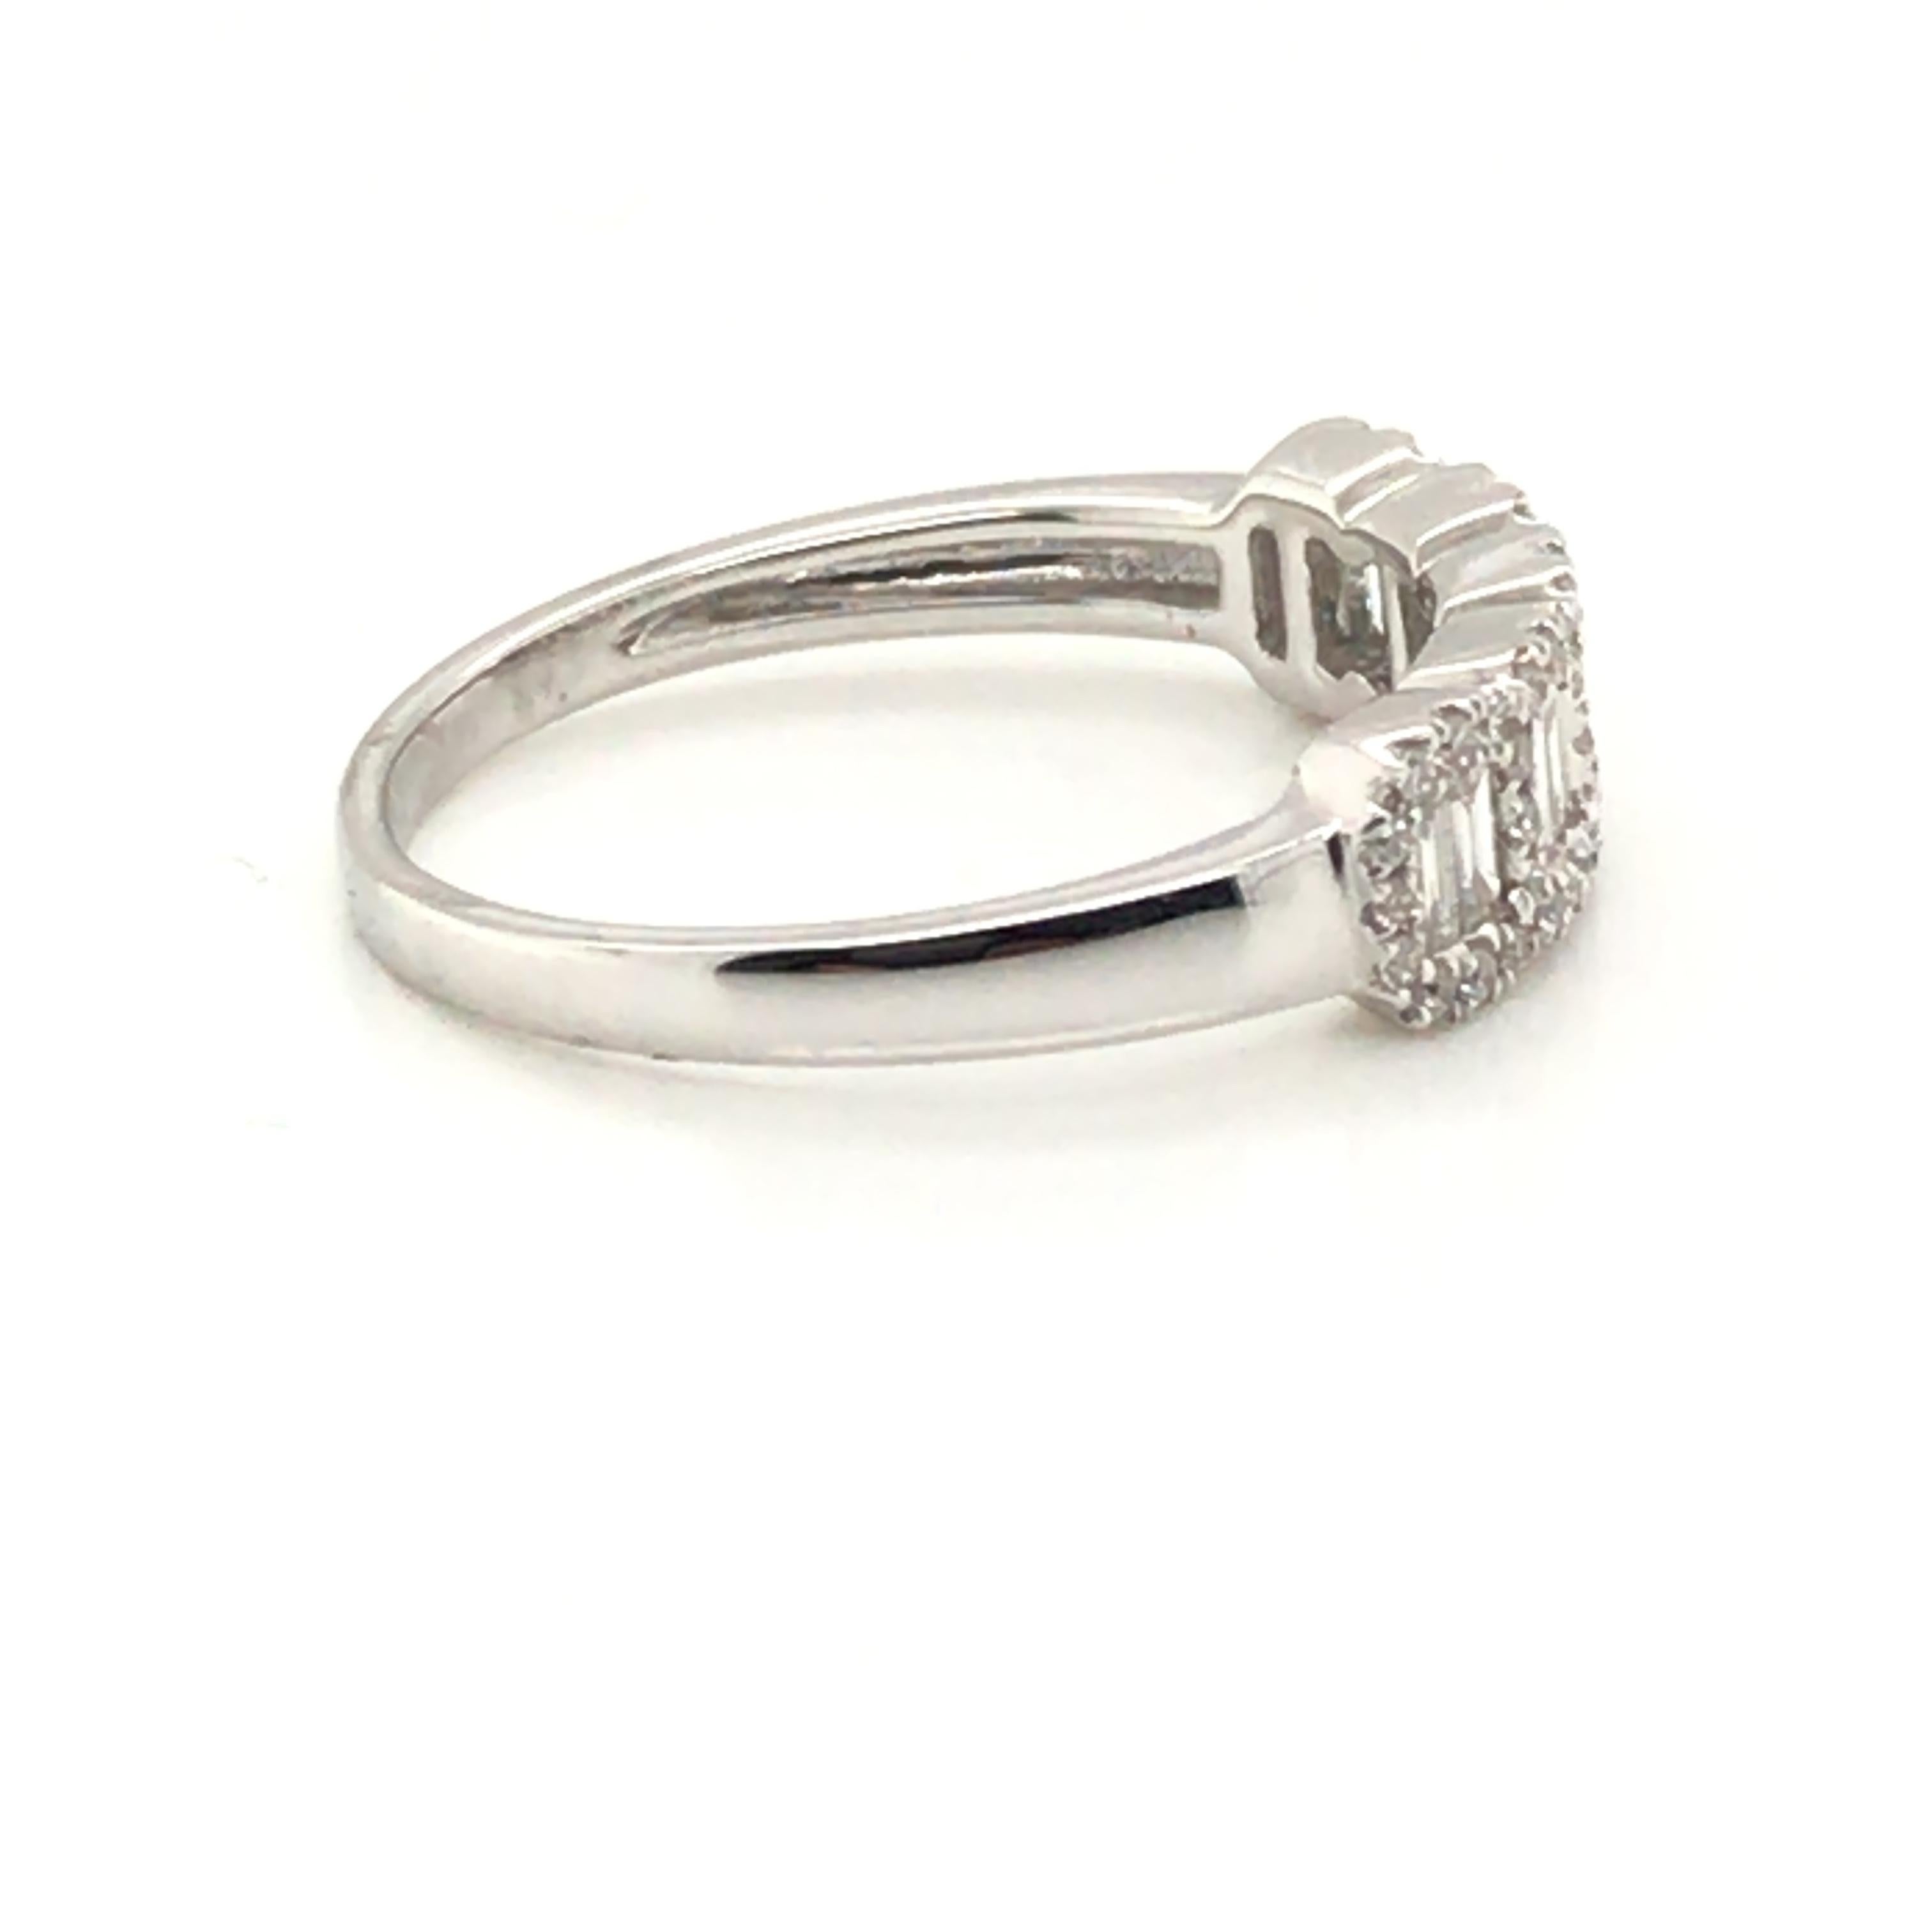 HJN Inc. Ring featuring a 5-Section Baguette Cluster Ring

Baguette-Cut Diamond Weight: 0.20 Carats
Round-Cut Diamond Weight: 0.20 Carats

Clarity Grade: SI1
Color Grade: G
Total Diamond Weight: 0.40 Carats
Polish and Symmetry: Very Good
Style